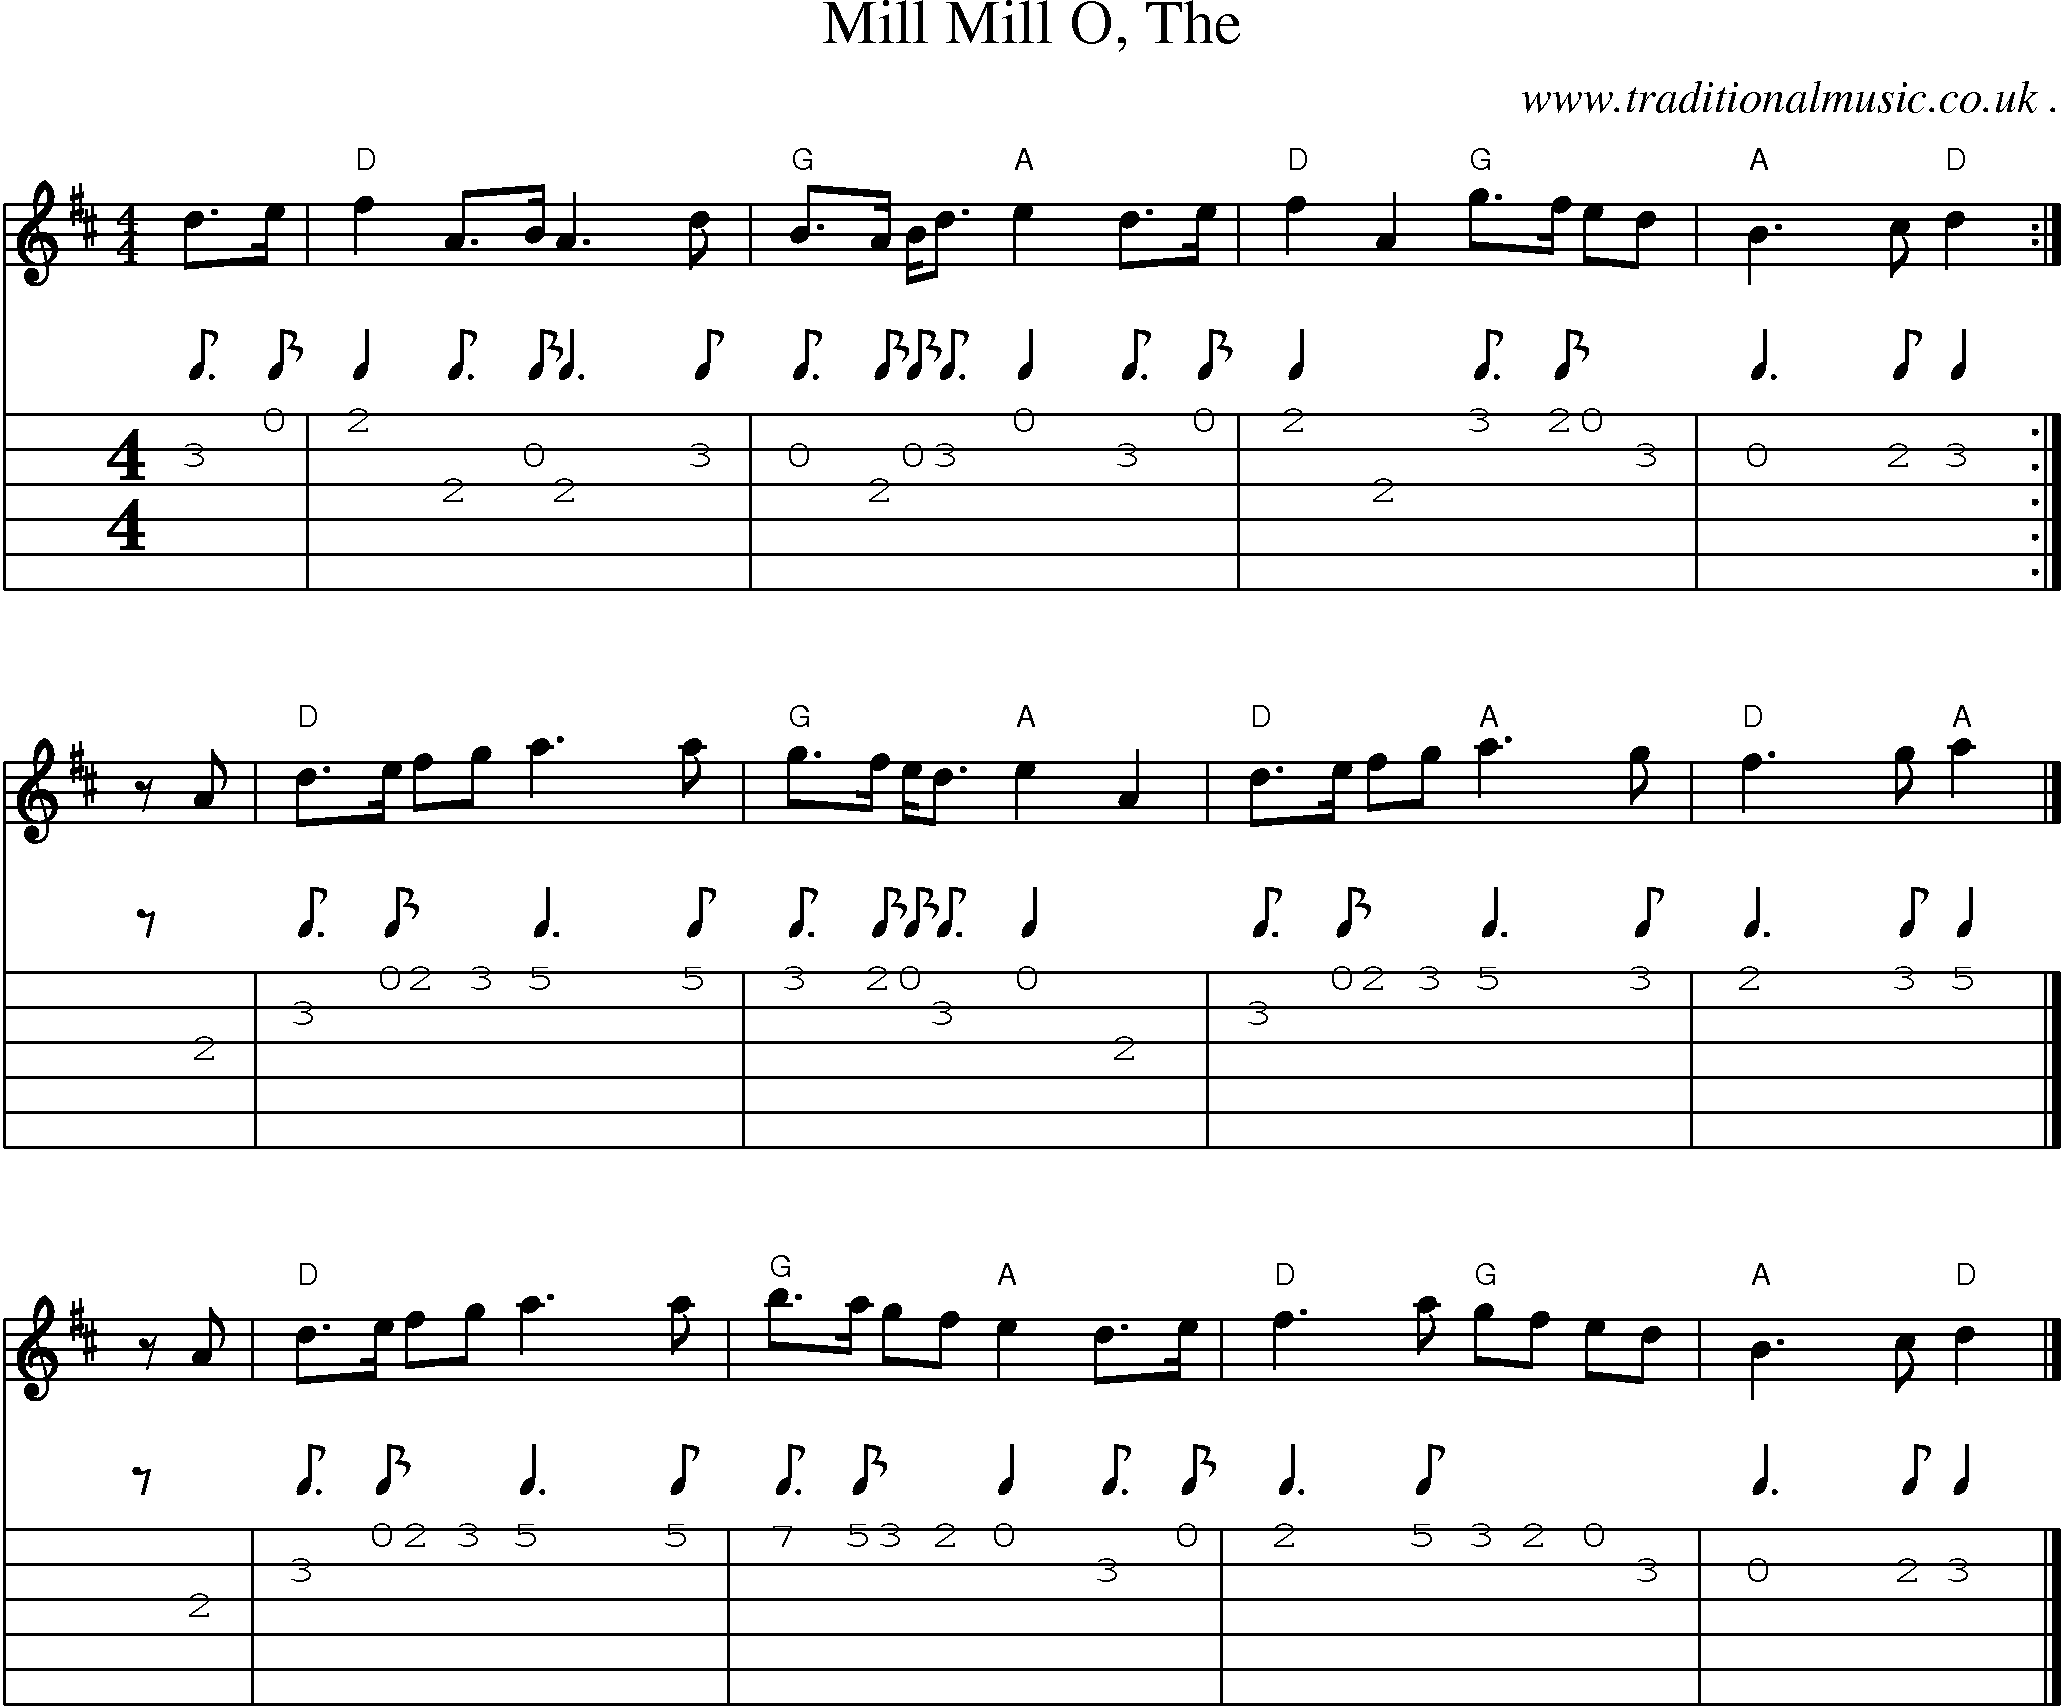 Sheet-music  score, Chords and Guitar Tabs for Mill Mill O The